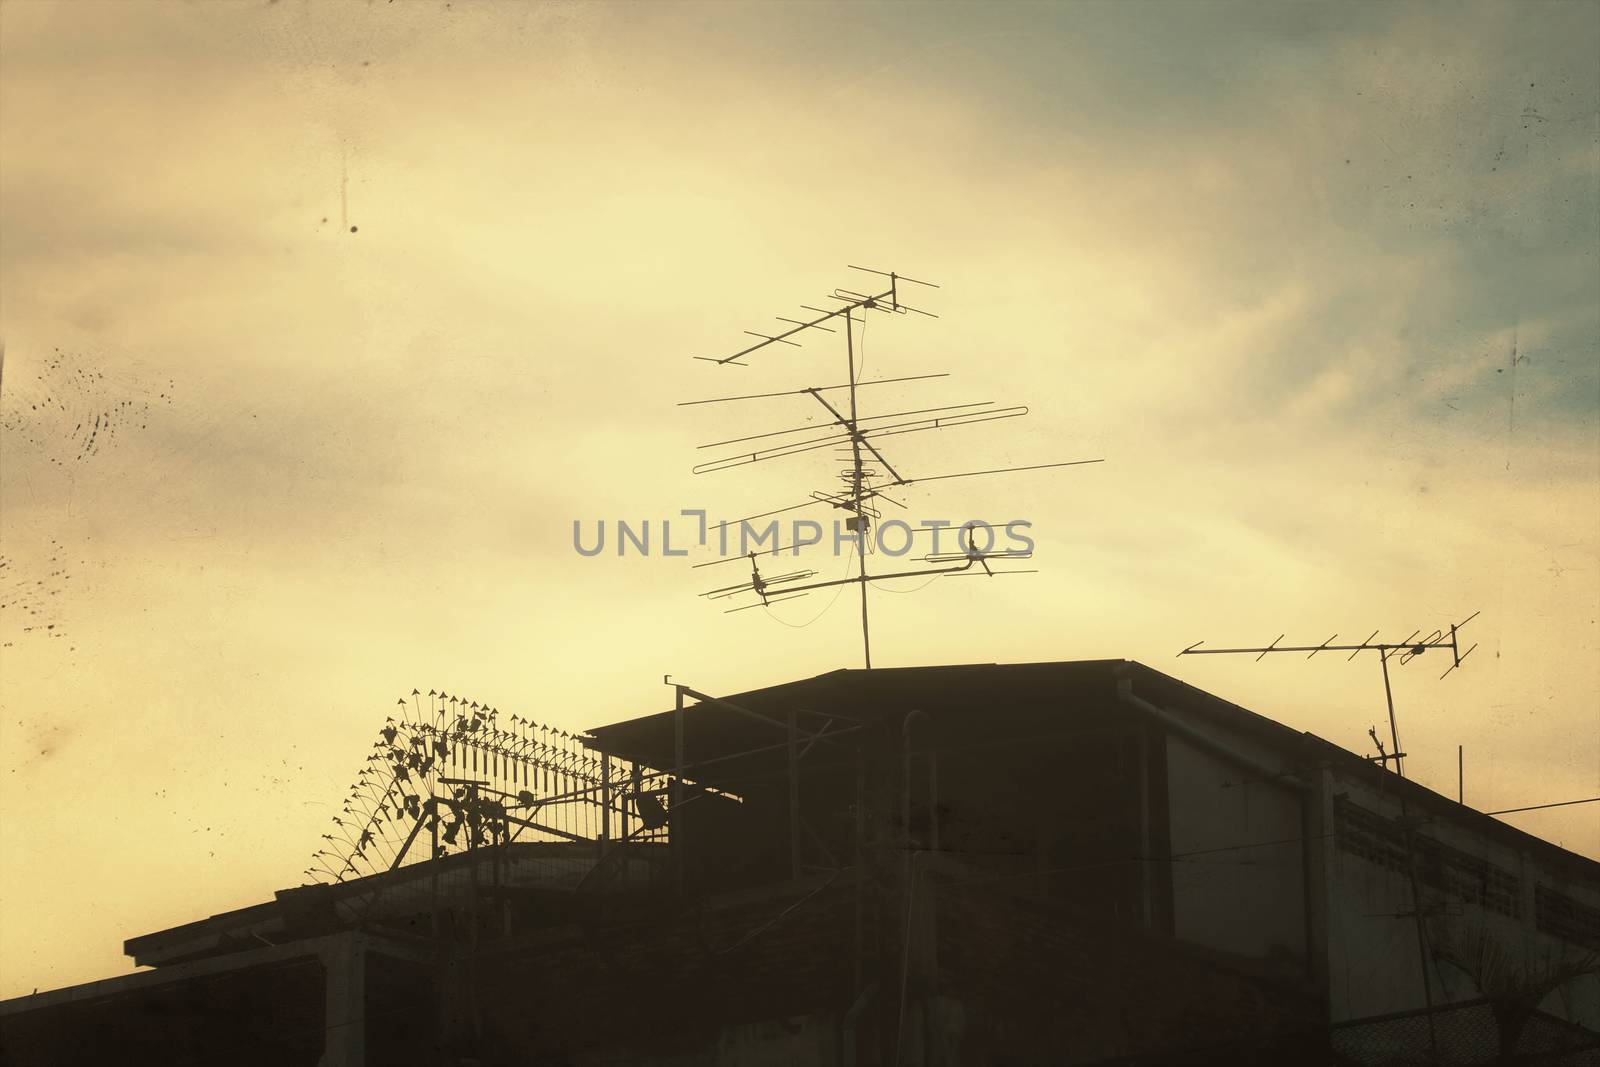 Asia Country house or home Countryside silhouette dark on sky background yellow gold dark old urban picture vintage art retro style